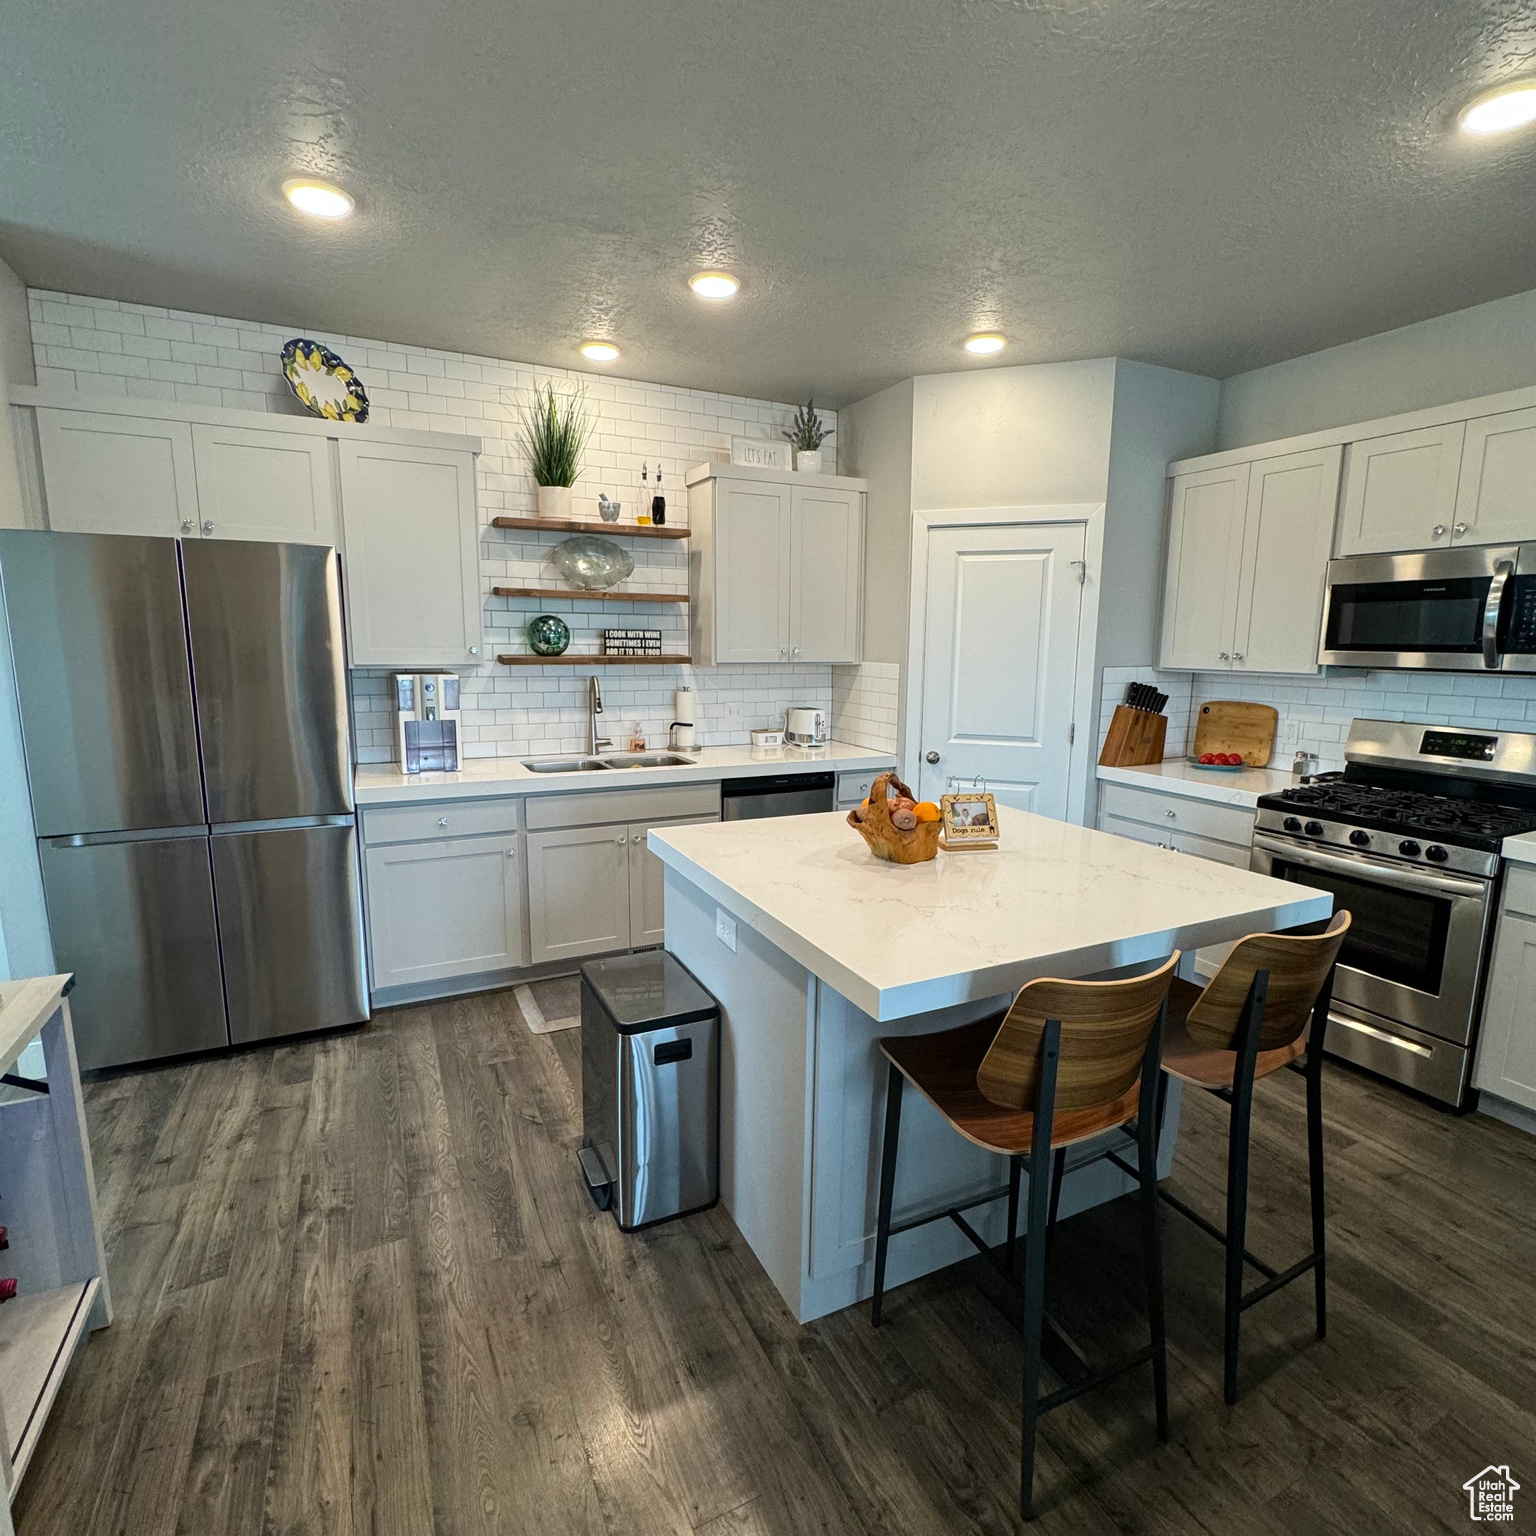 Kitchen with dark hardwood / wood-style flooring, appliances with stainless steel finishes, a center island, and tasteful backsplash